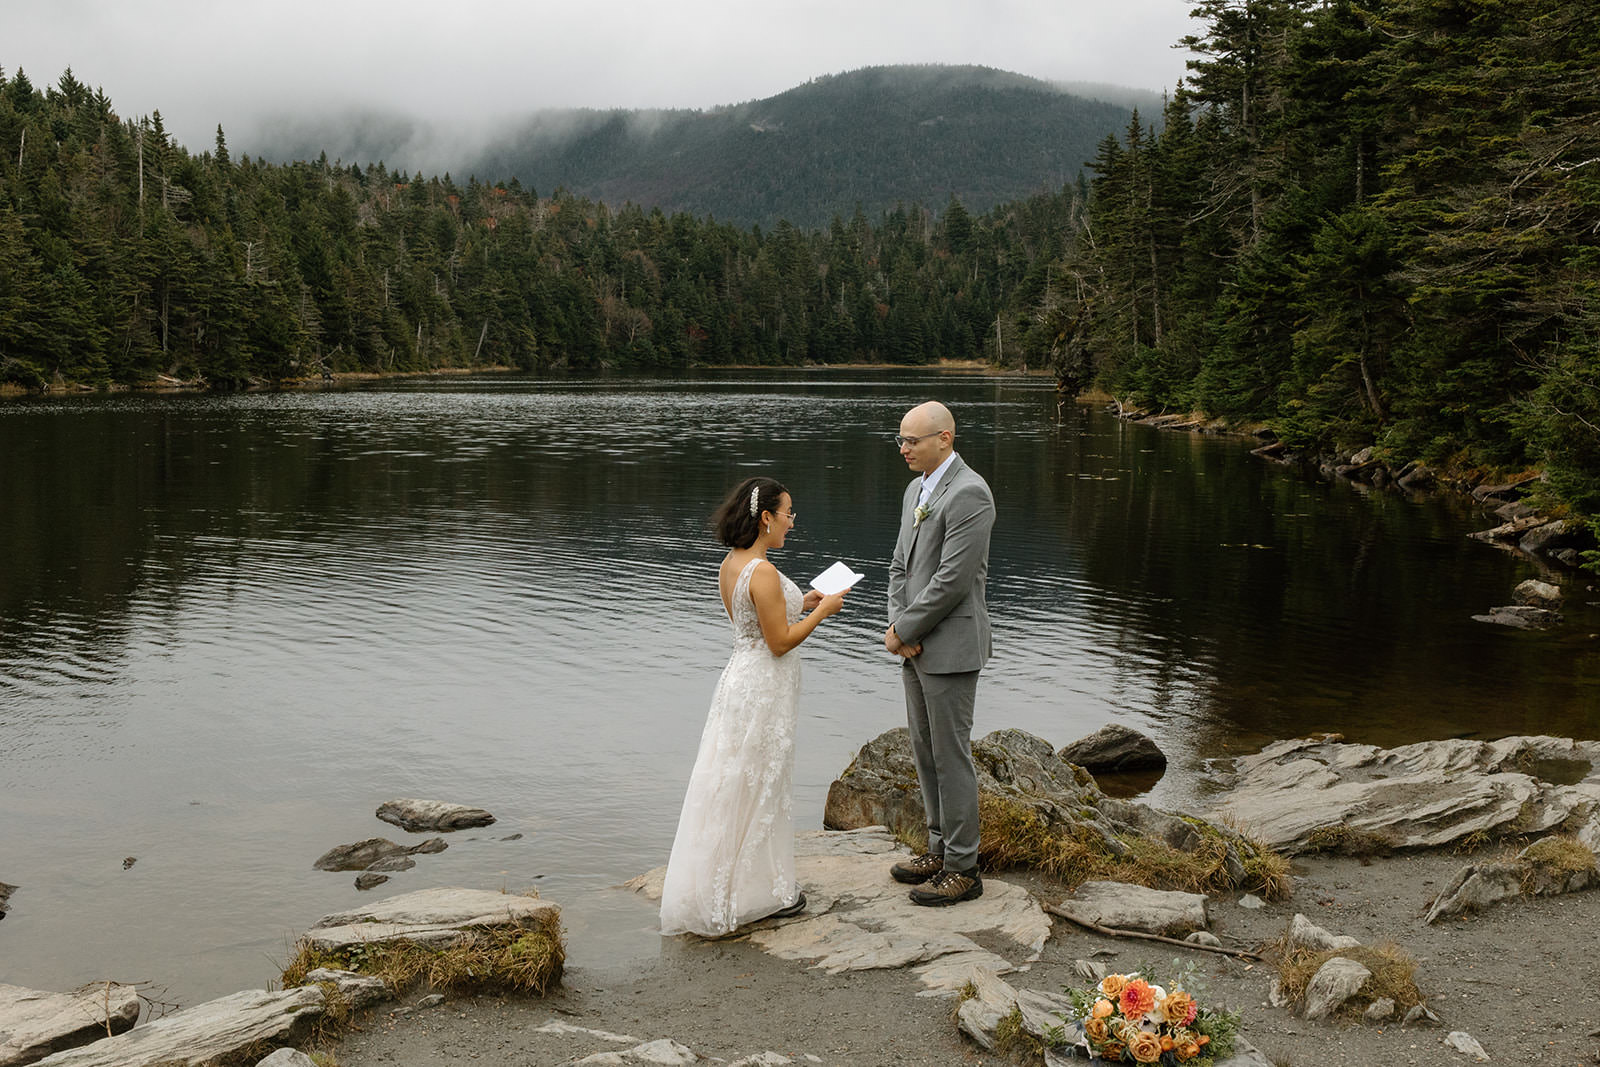 Stowe Vermont Elopement in the Fall, Stowe Vermont elopement photographer